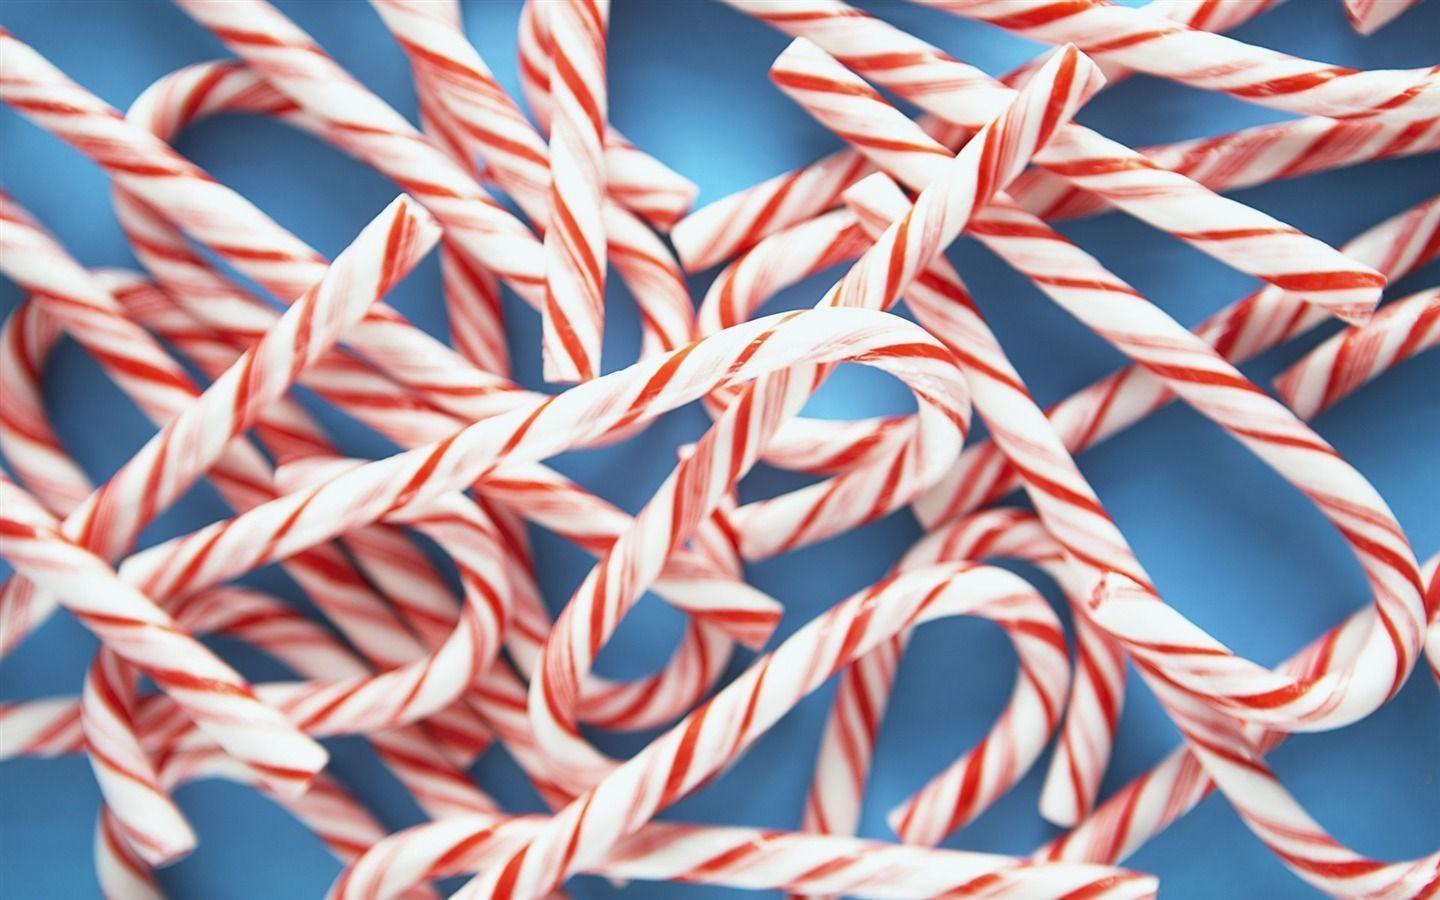 Download Candy Cane Picture 38139 1440x900 px High Resolution